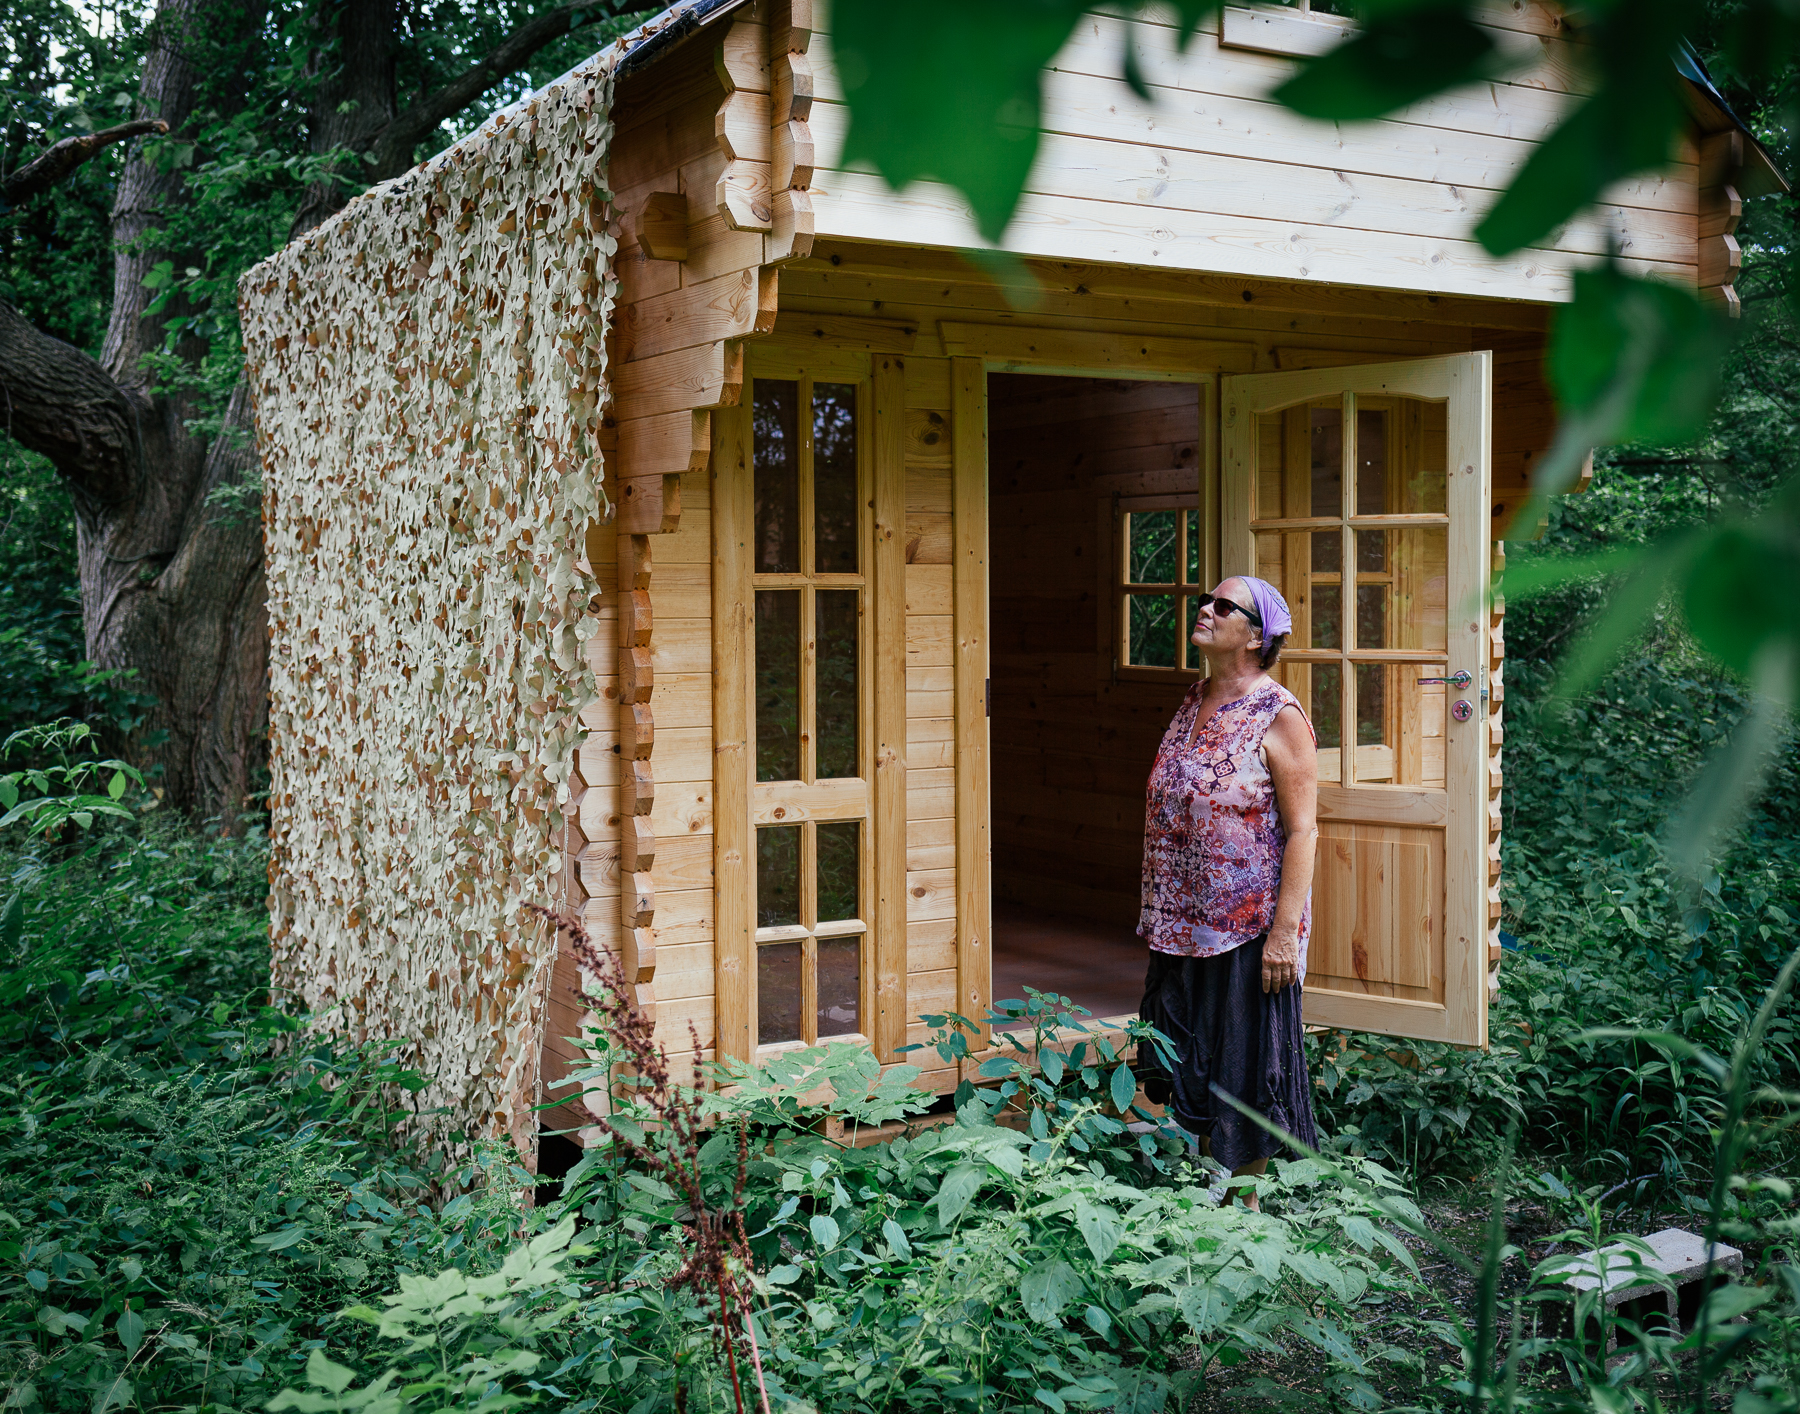 In 2012, the same year the quarry theatre started, they had artist residencies at a rented farmhouse on the island. The concept worked, so they recently put up three tiny houses and a small composting toilet on Patricia’s land where artists can stay in the future.